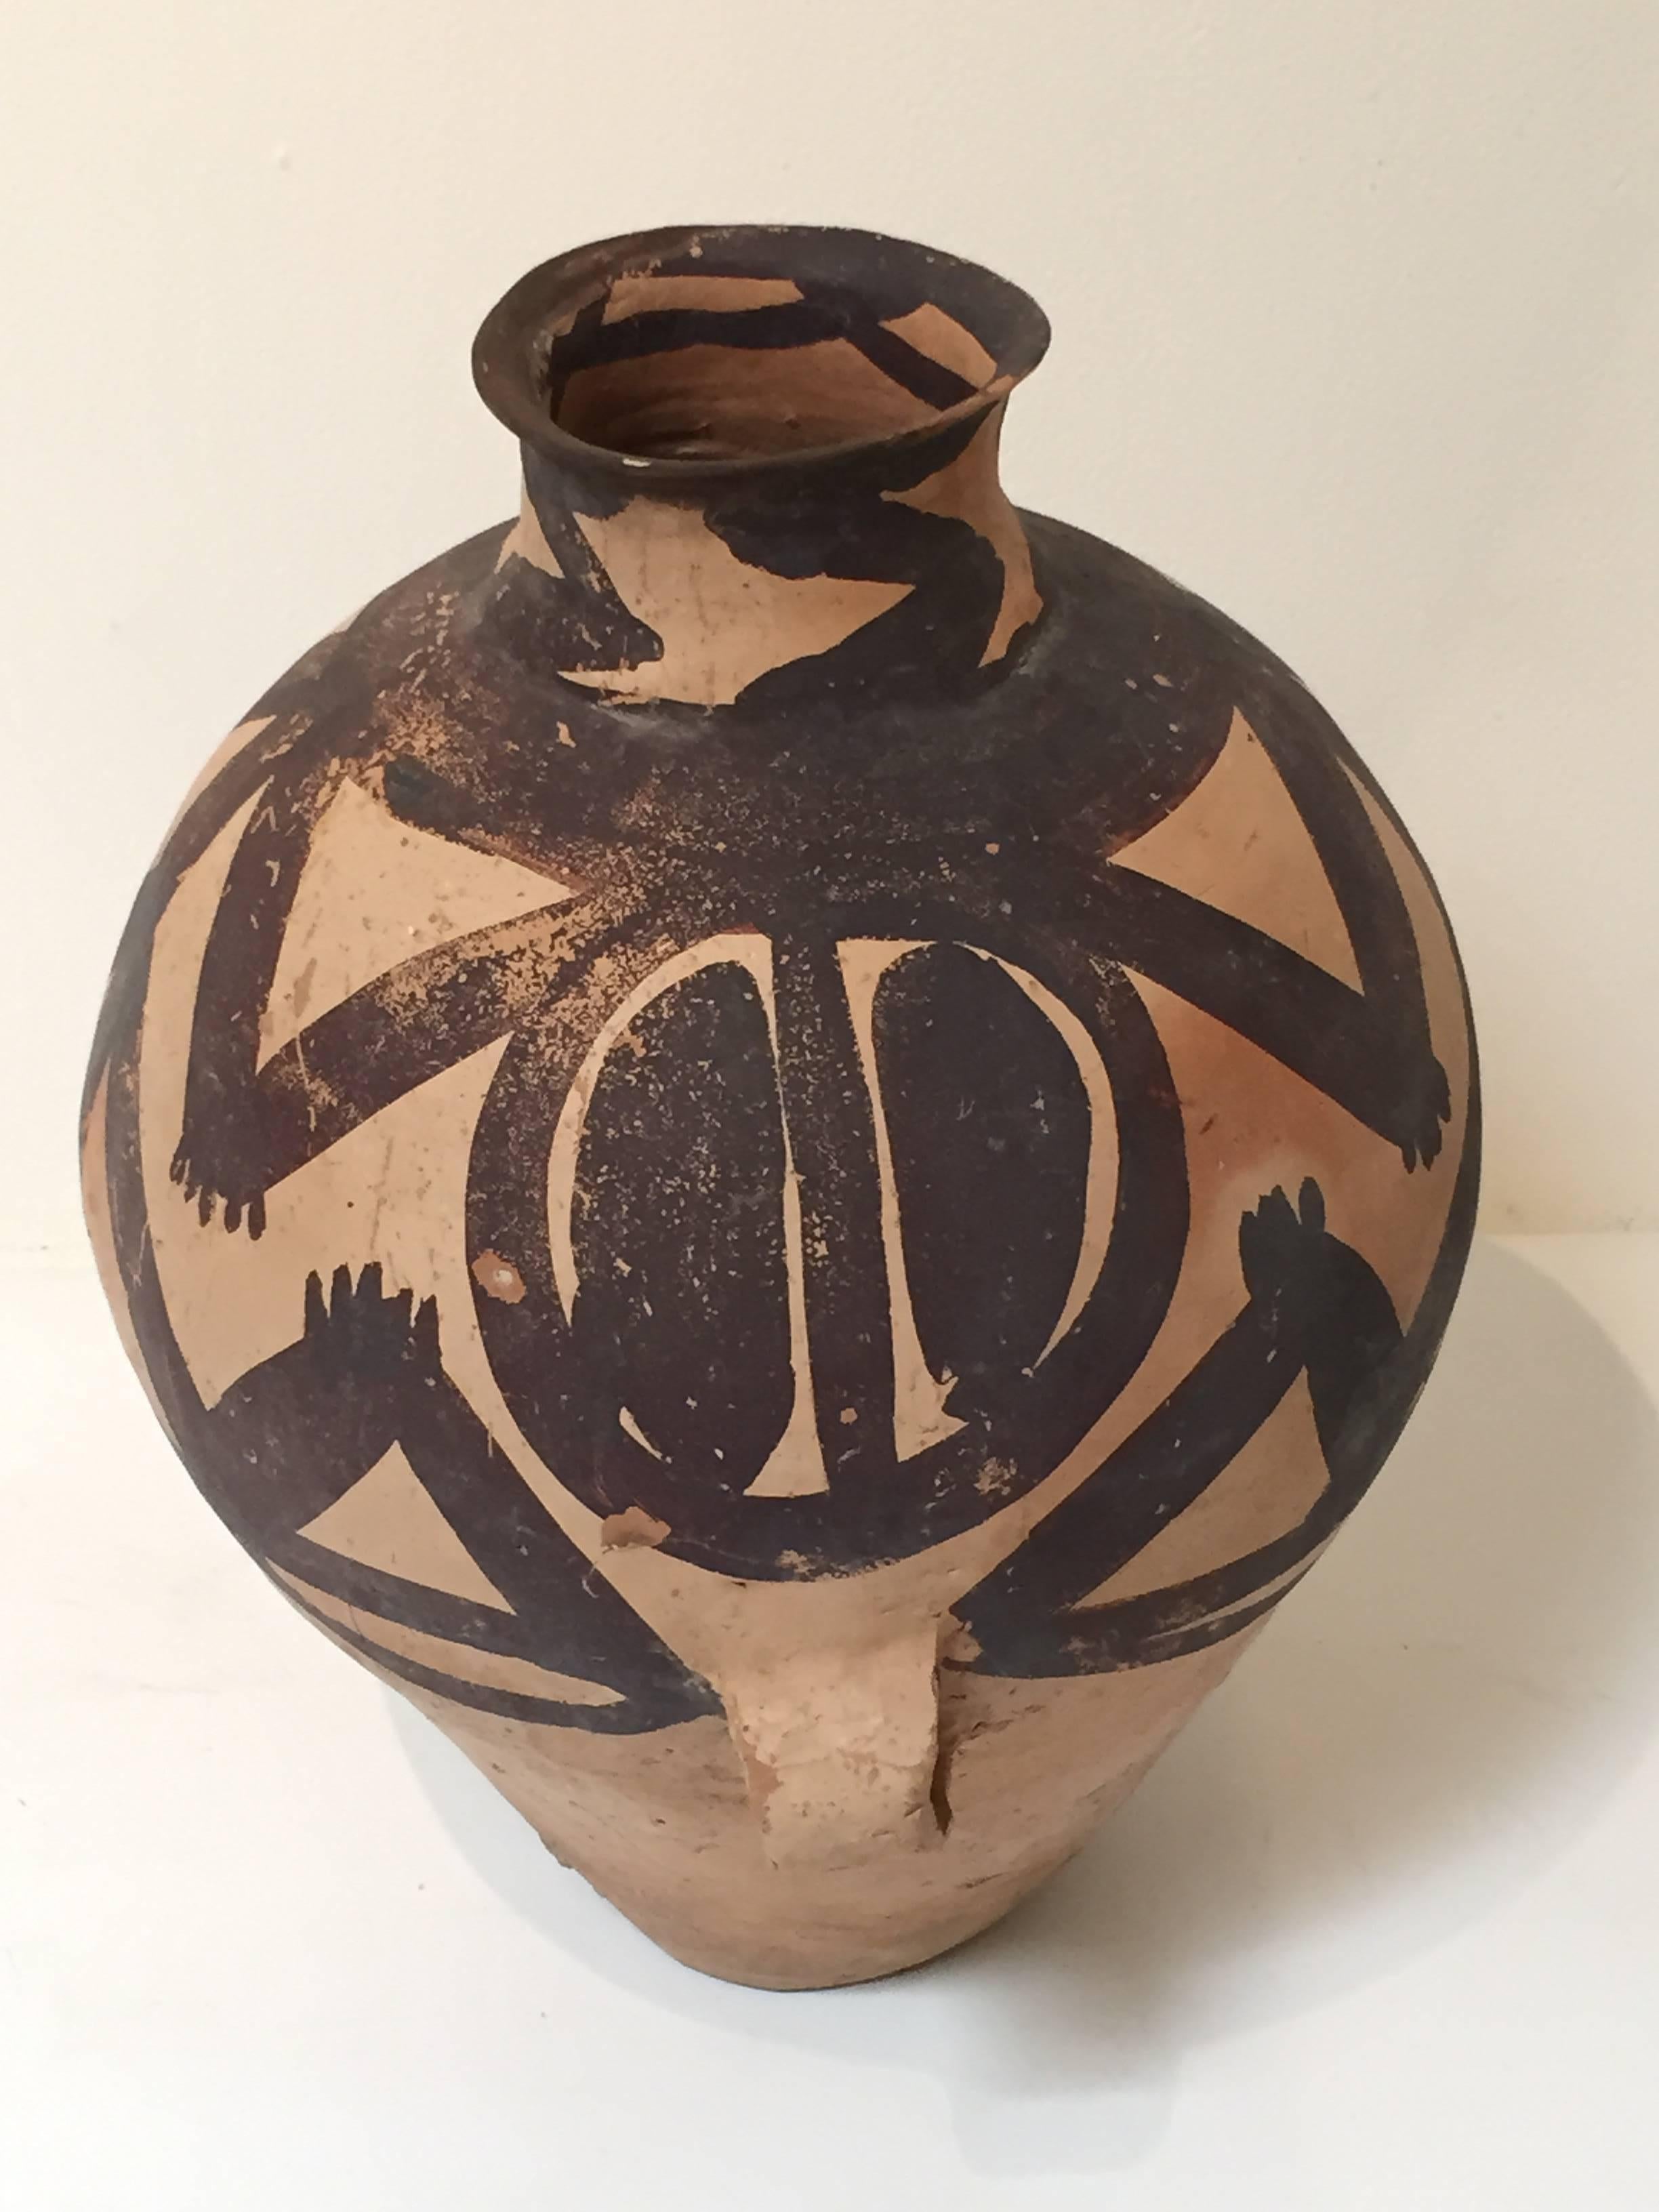 A Neolithic pot dating to the Majiayao culture, circa 2500 BC. Machang type.
All natural pigments with a frog pattern design.